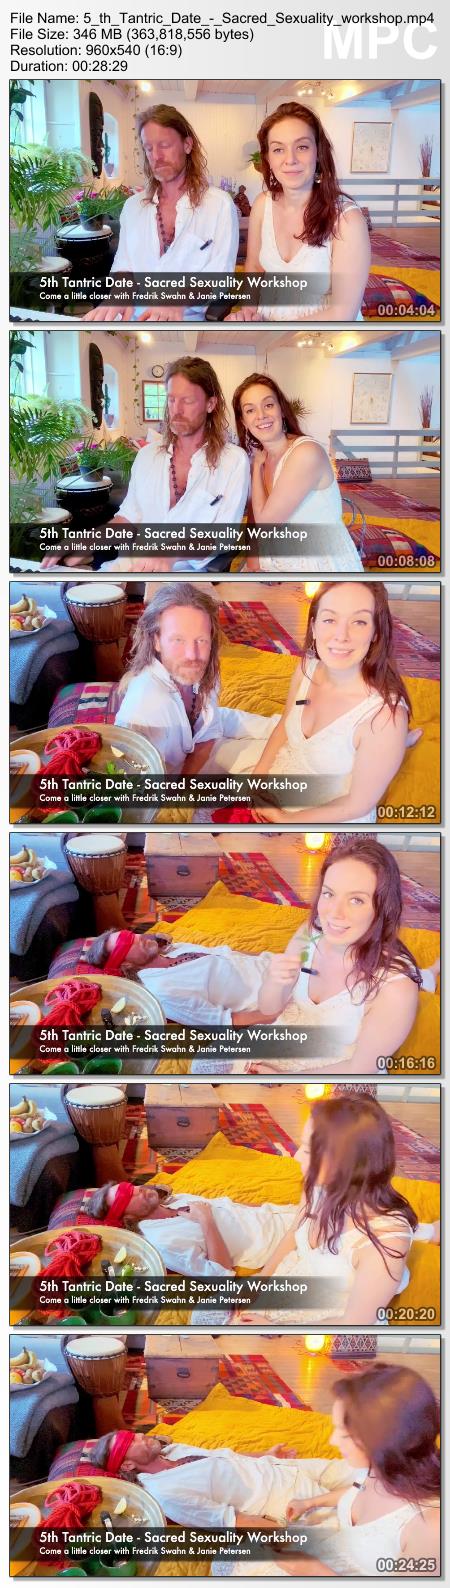 7 Tantric Dates - Online Course for Couples by Fredrik Swahn & Janie Petersen